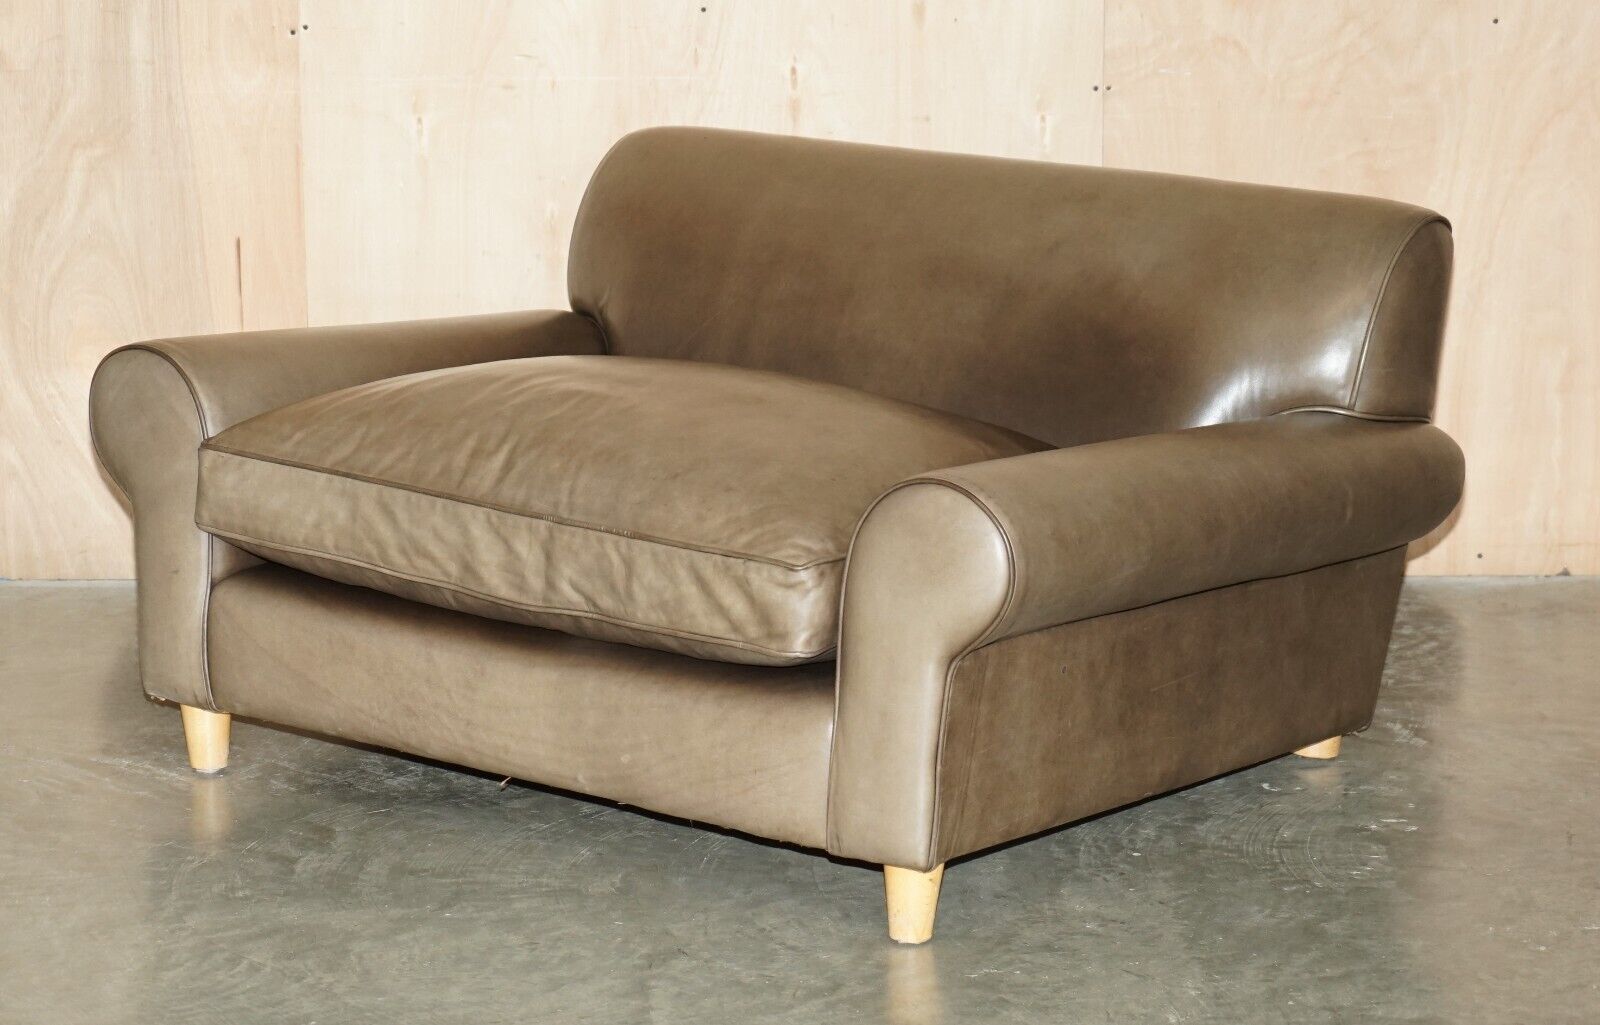 STUNNING RRP £3200 TERENCE CONRAN GREY LEATHER LARGE LOVESEAT ARMCHAIR SOFA